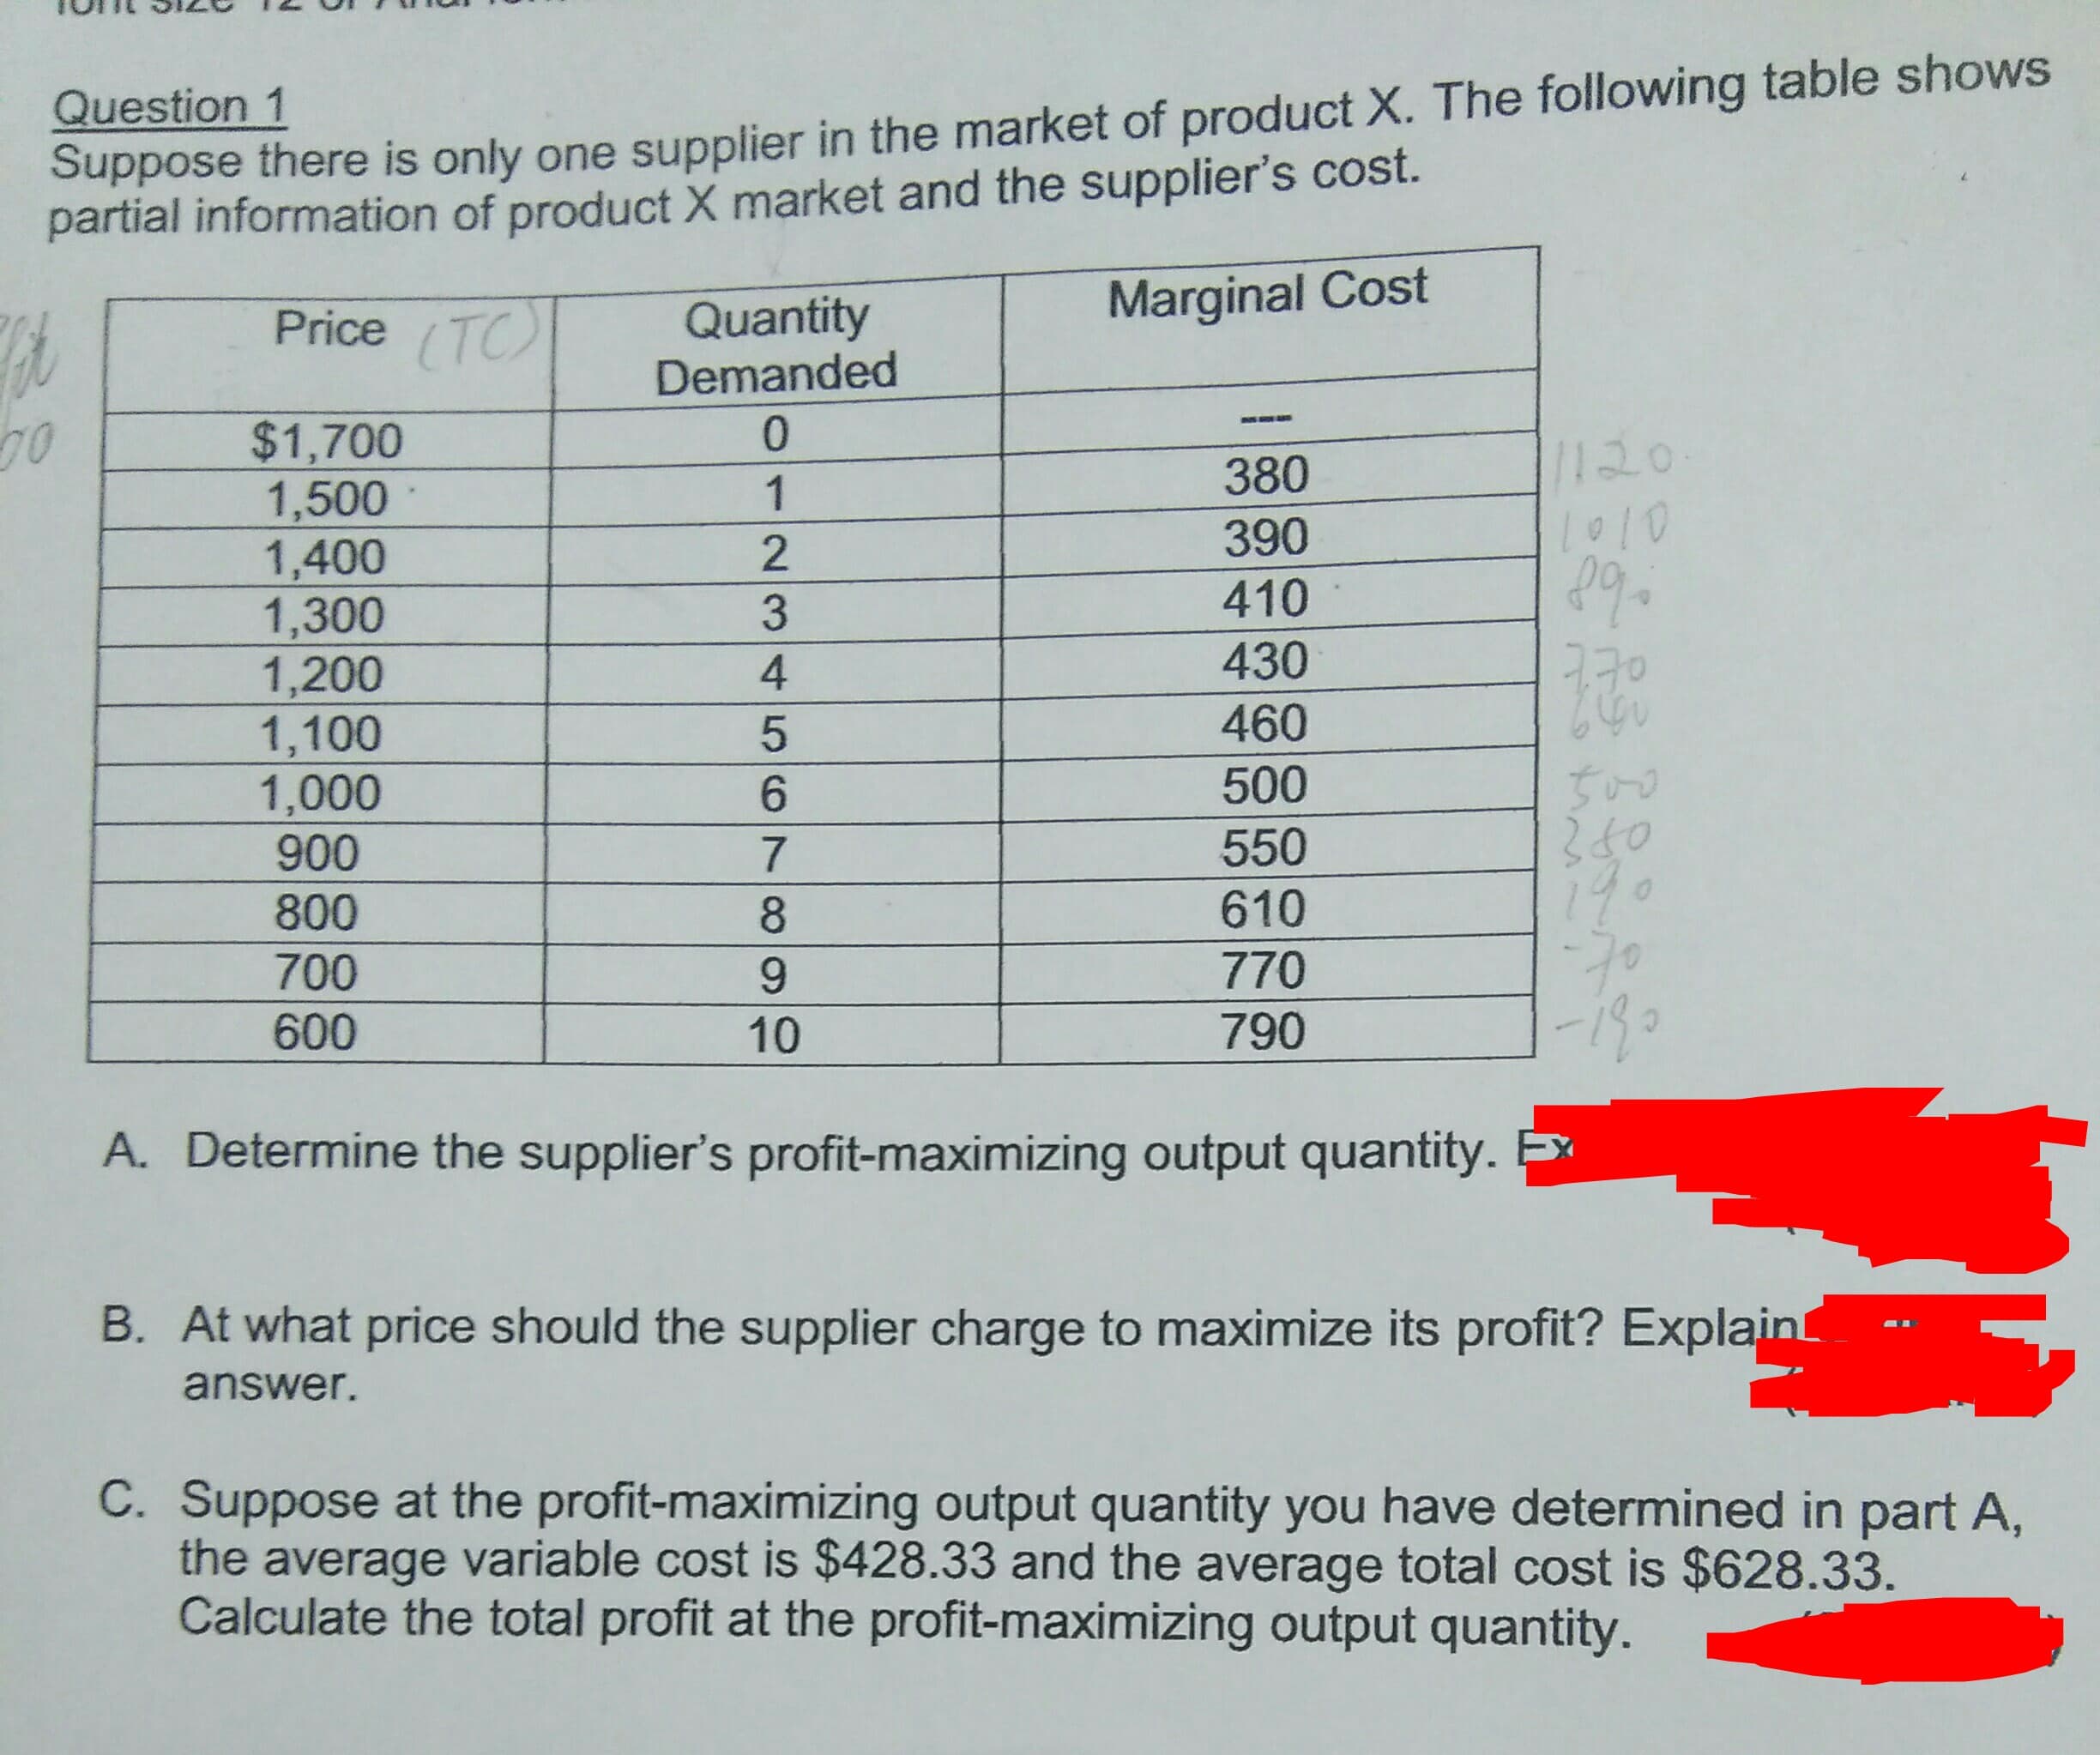 Question 1
Suppose there is only one supplier in the market of product X. The following table shows
partial information of product X market and the supplier's Cost.
Marginal Cost
Price TC
Quantity
Demanded
0
70
$1,700
1,500
1,400
1,300
1,200
1,100
1,000
900
/120
L010
380
1
390
2
410
3
430
4
460
500
6
550
7
17.
610
800
8
770
700
9
-I80
790
600
10
A. Determine the supplier's profit-maximizing output quantity.
B. At what price should the supplier charge to maximize its profit? Explain
answer.
C. Suppose at the profit-maximizing output quantity you have determined in part A,
the average variable cost is $428.33 and the average total cost is $628.33
Calculate the total profit at the profit-maximizing output quantity.
5 0
